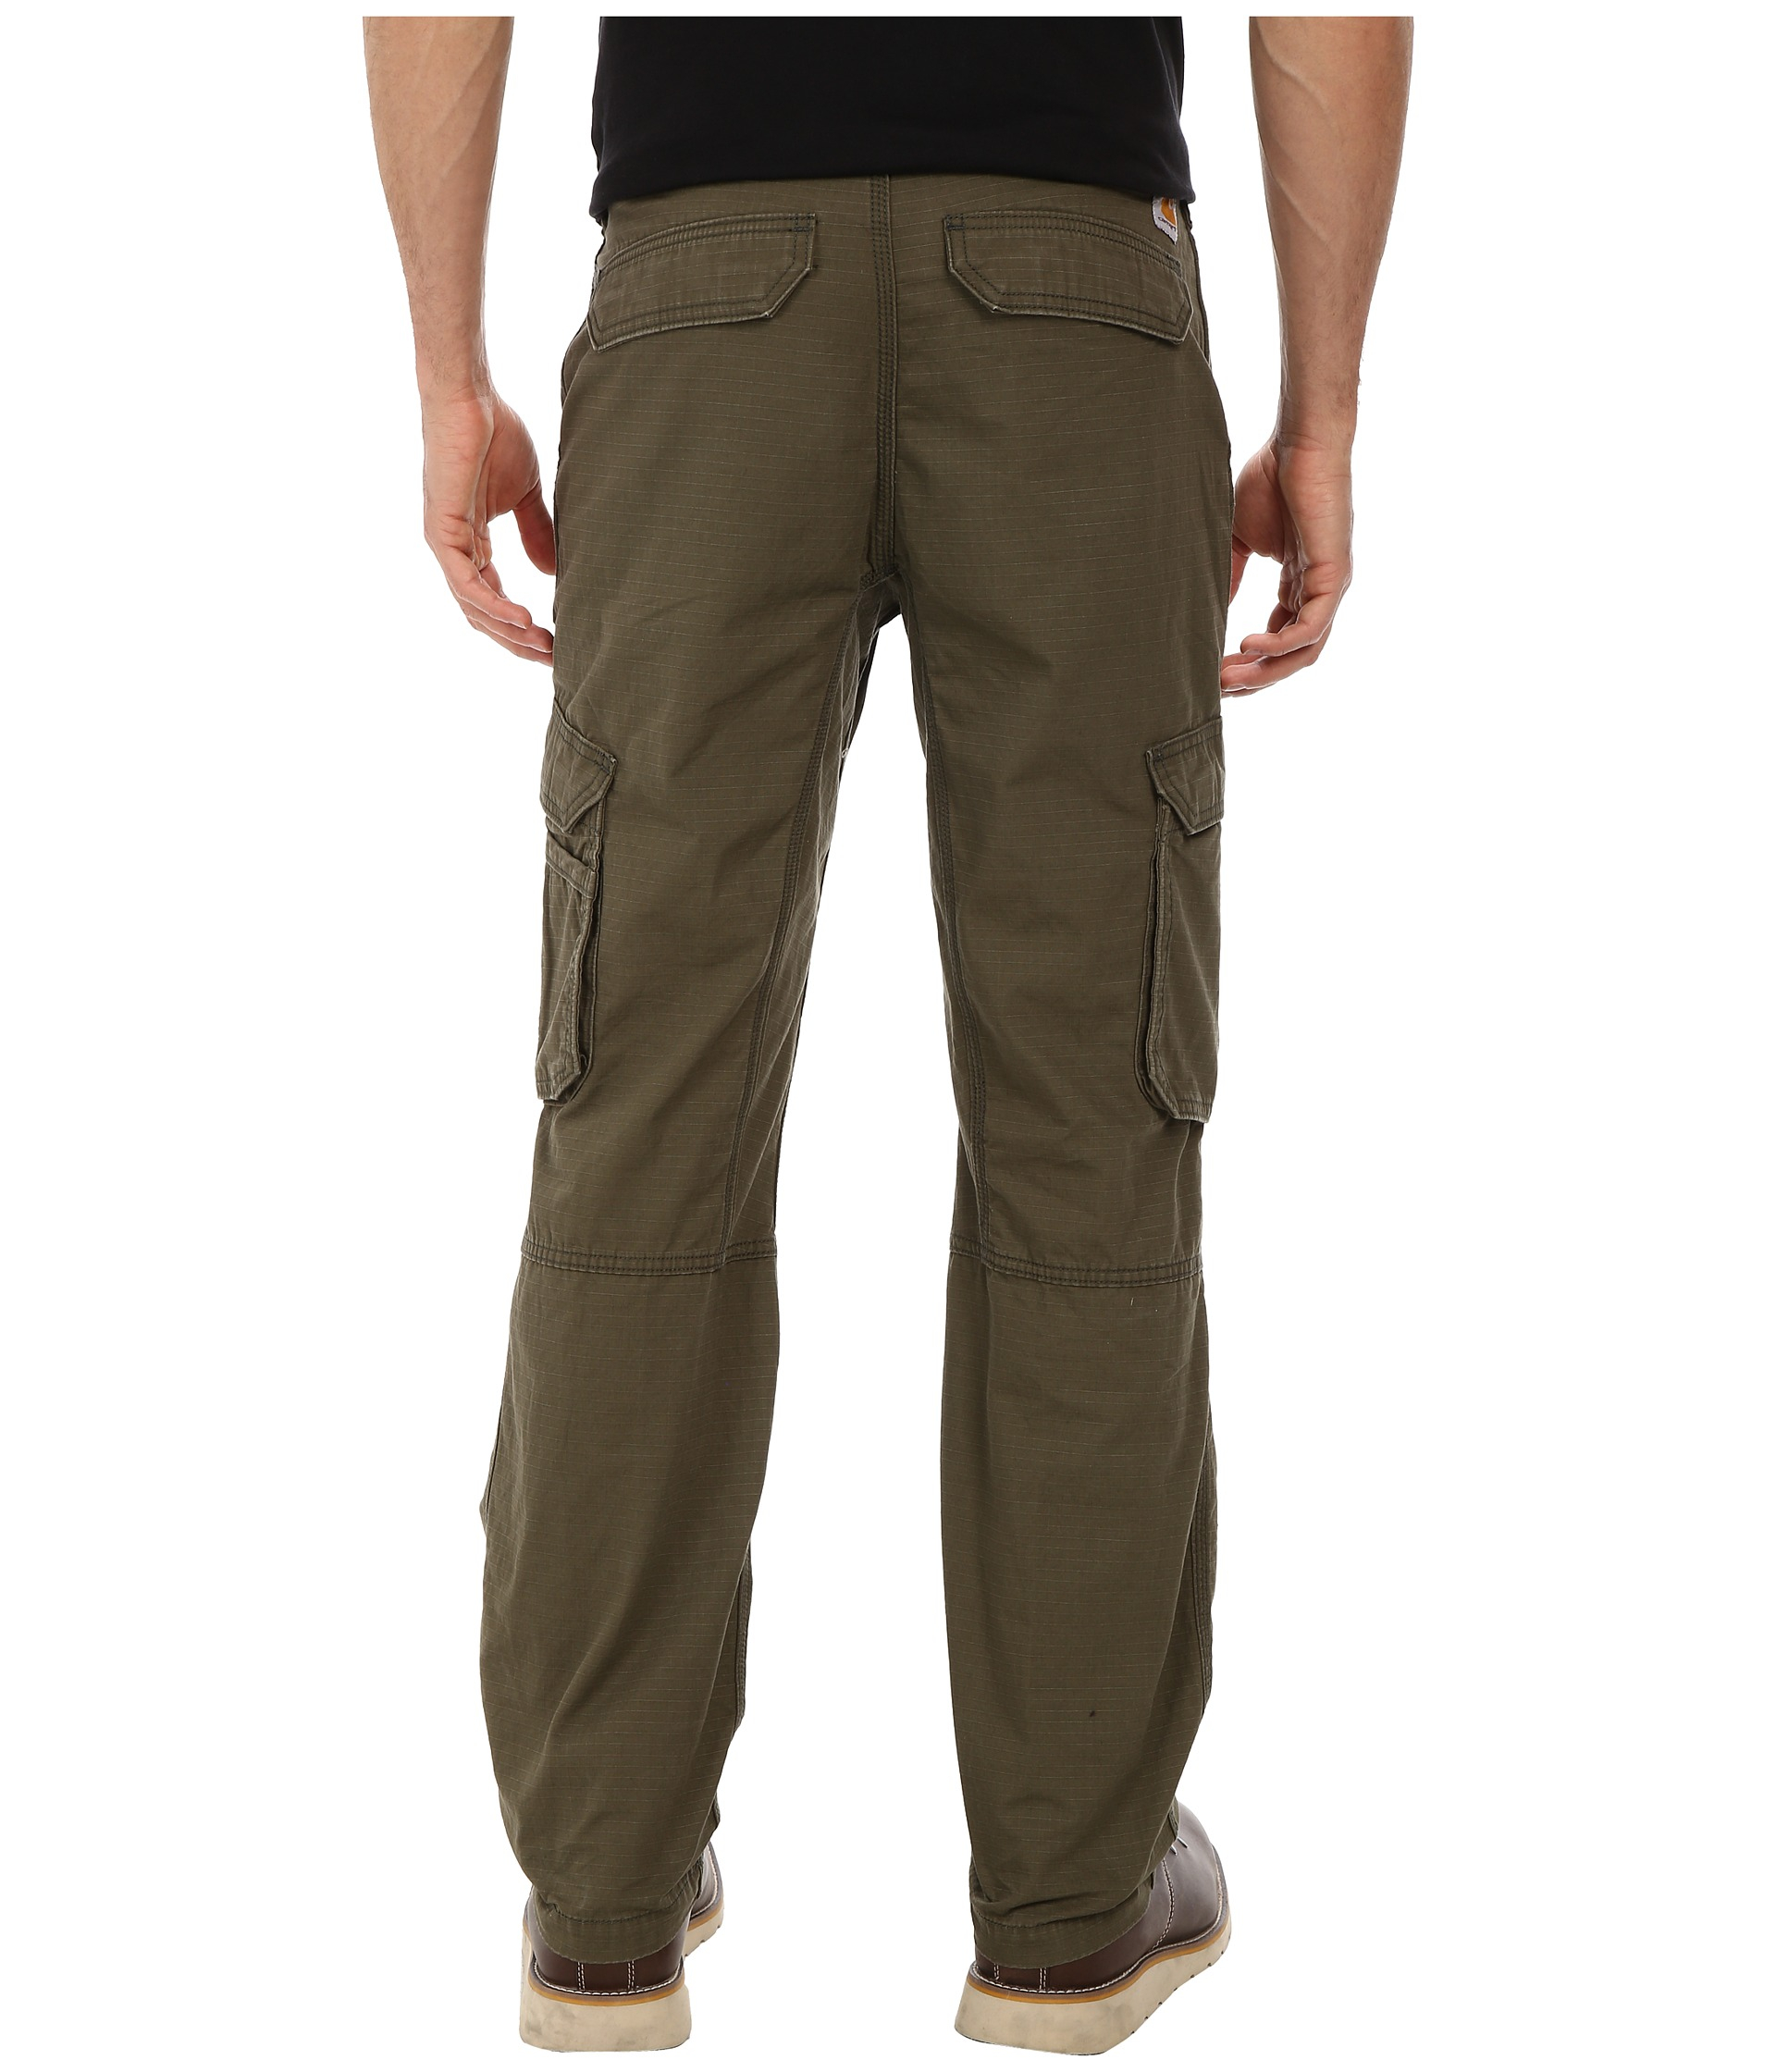 Carhartt Canvas Force Tappen Cargo Pant in Army Green (Green) for Men - Lyst